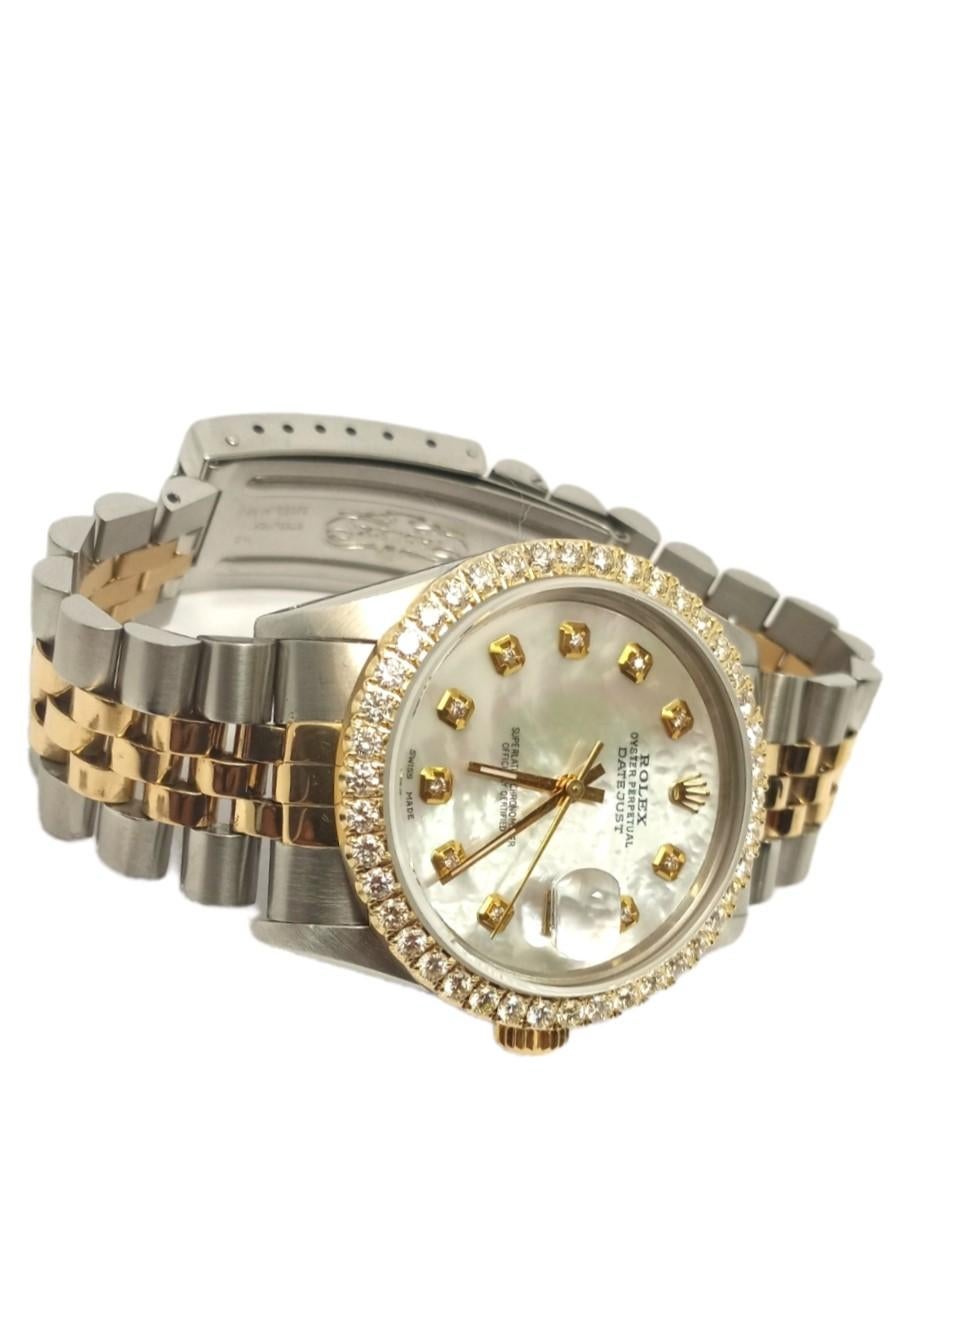 Brand - Rolex
Gender - Mens
Model - 16233 datejust
Condition - pre owned
Metals - Yellow Gold/Stainless steel
Case size - 36mm
Bezel - Steel 2.0 CT diamond
Crystal - sapphire
Movement - Automatic cal 3135
Dial - Refinished Red diamond
Wrist band -